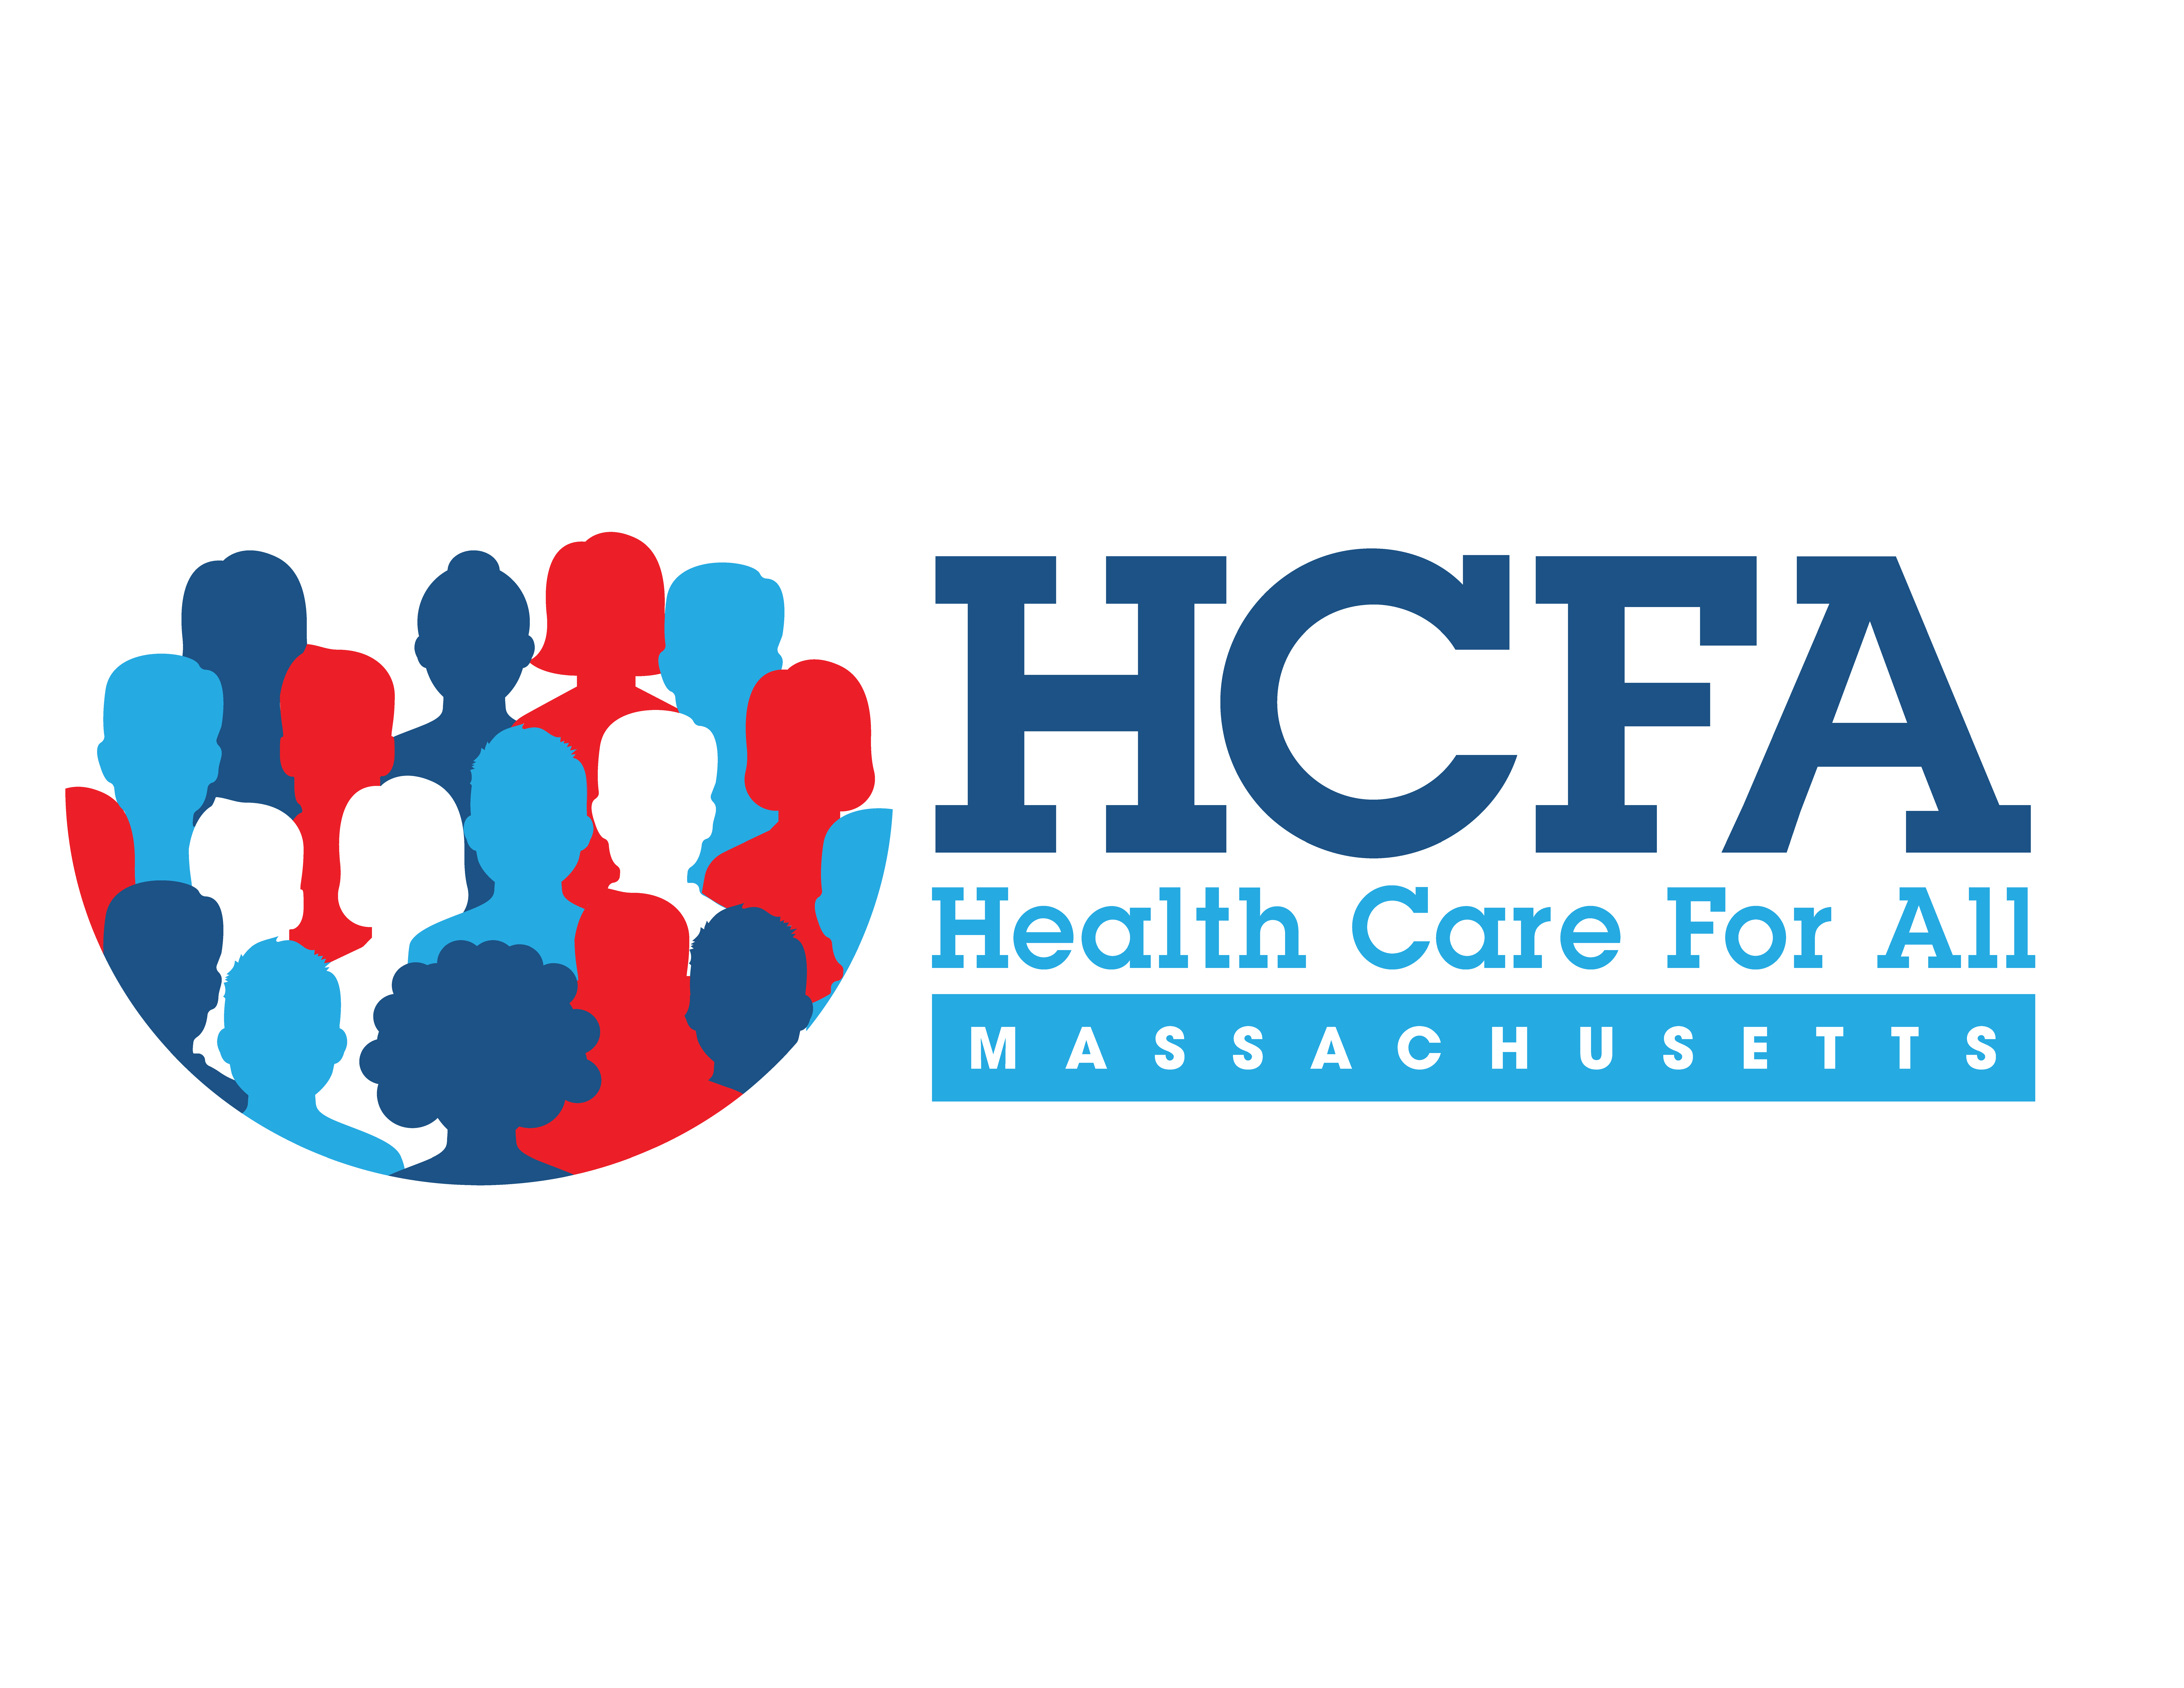 PRESS STATEMENT: Health Care For All Praises Legislators for Significant New Investments in Health Access in FY2023 State Budget